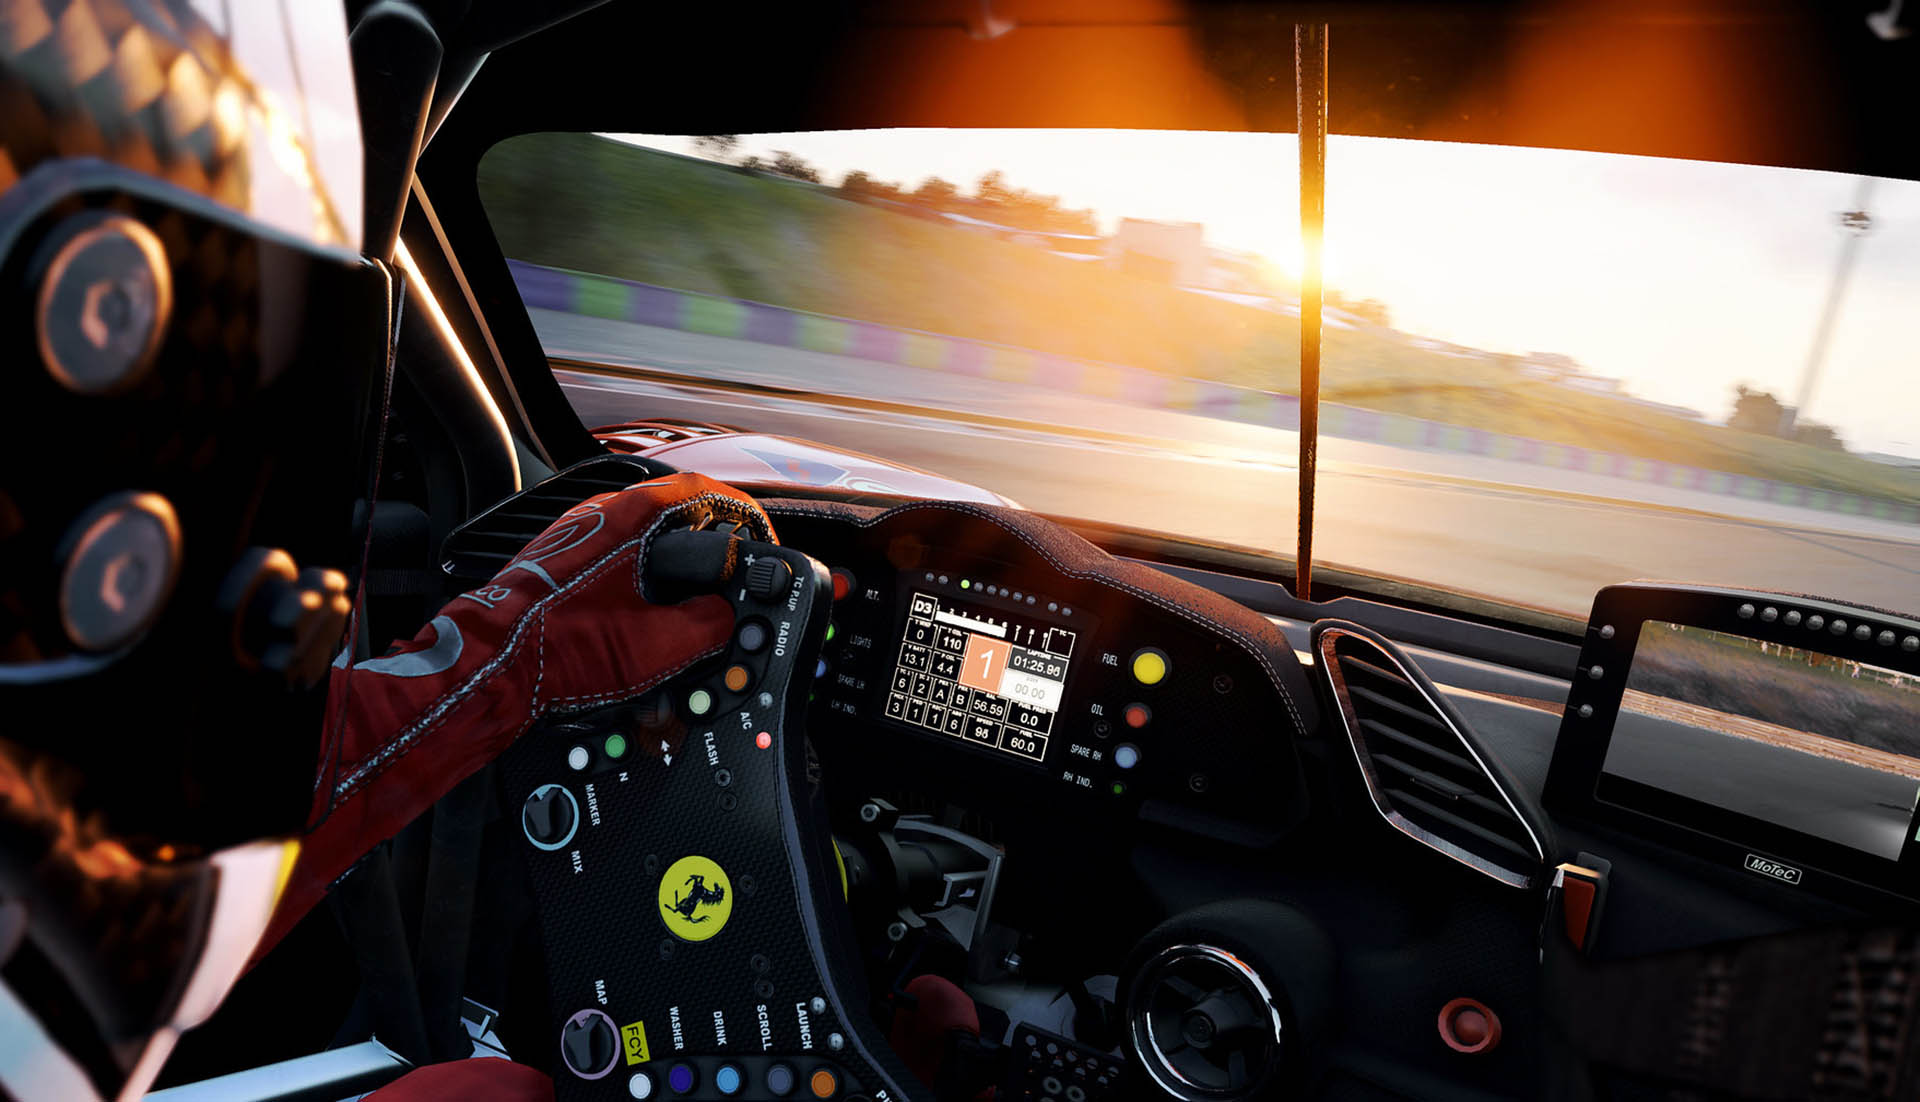 Assetto Corsa Competizione (PS4 and Xbox One) Review - Gamereactor